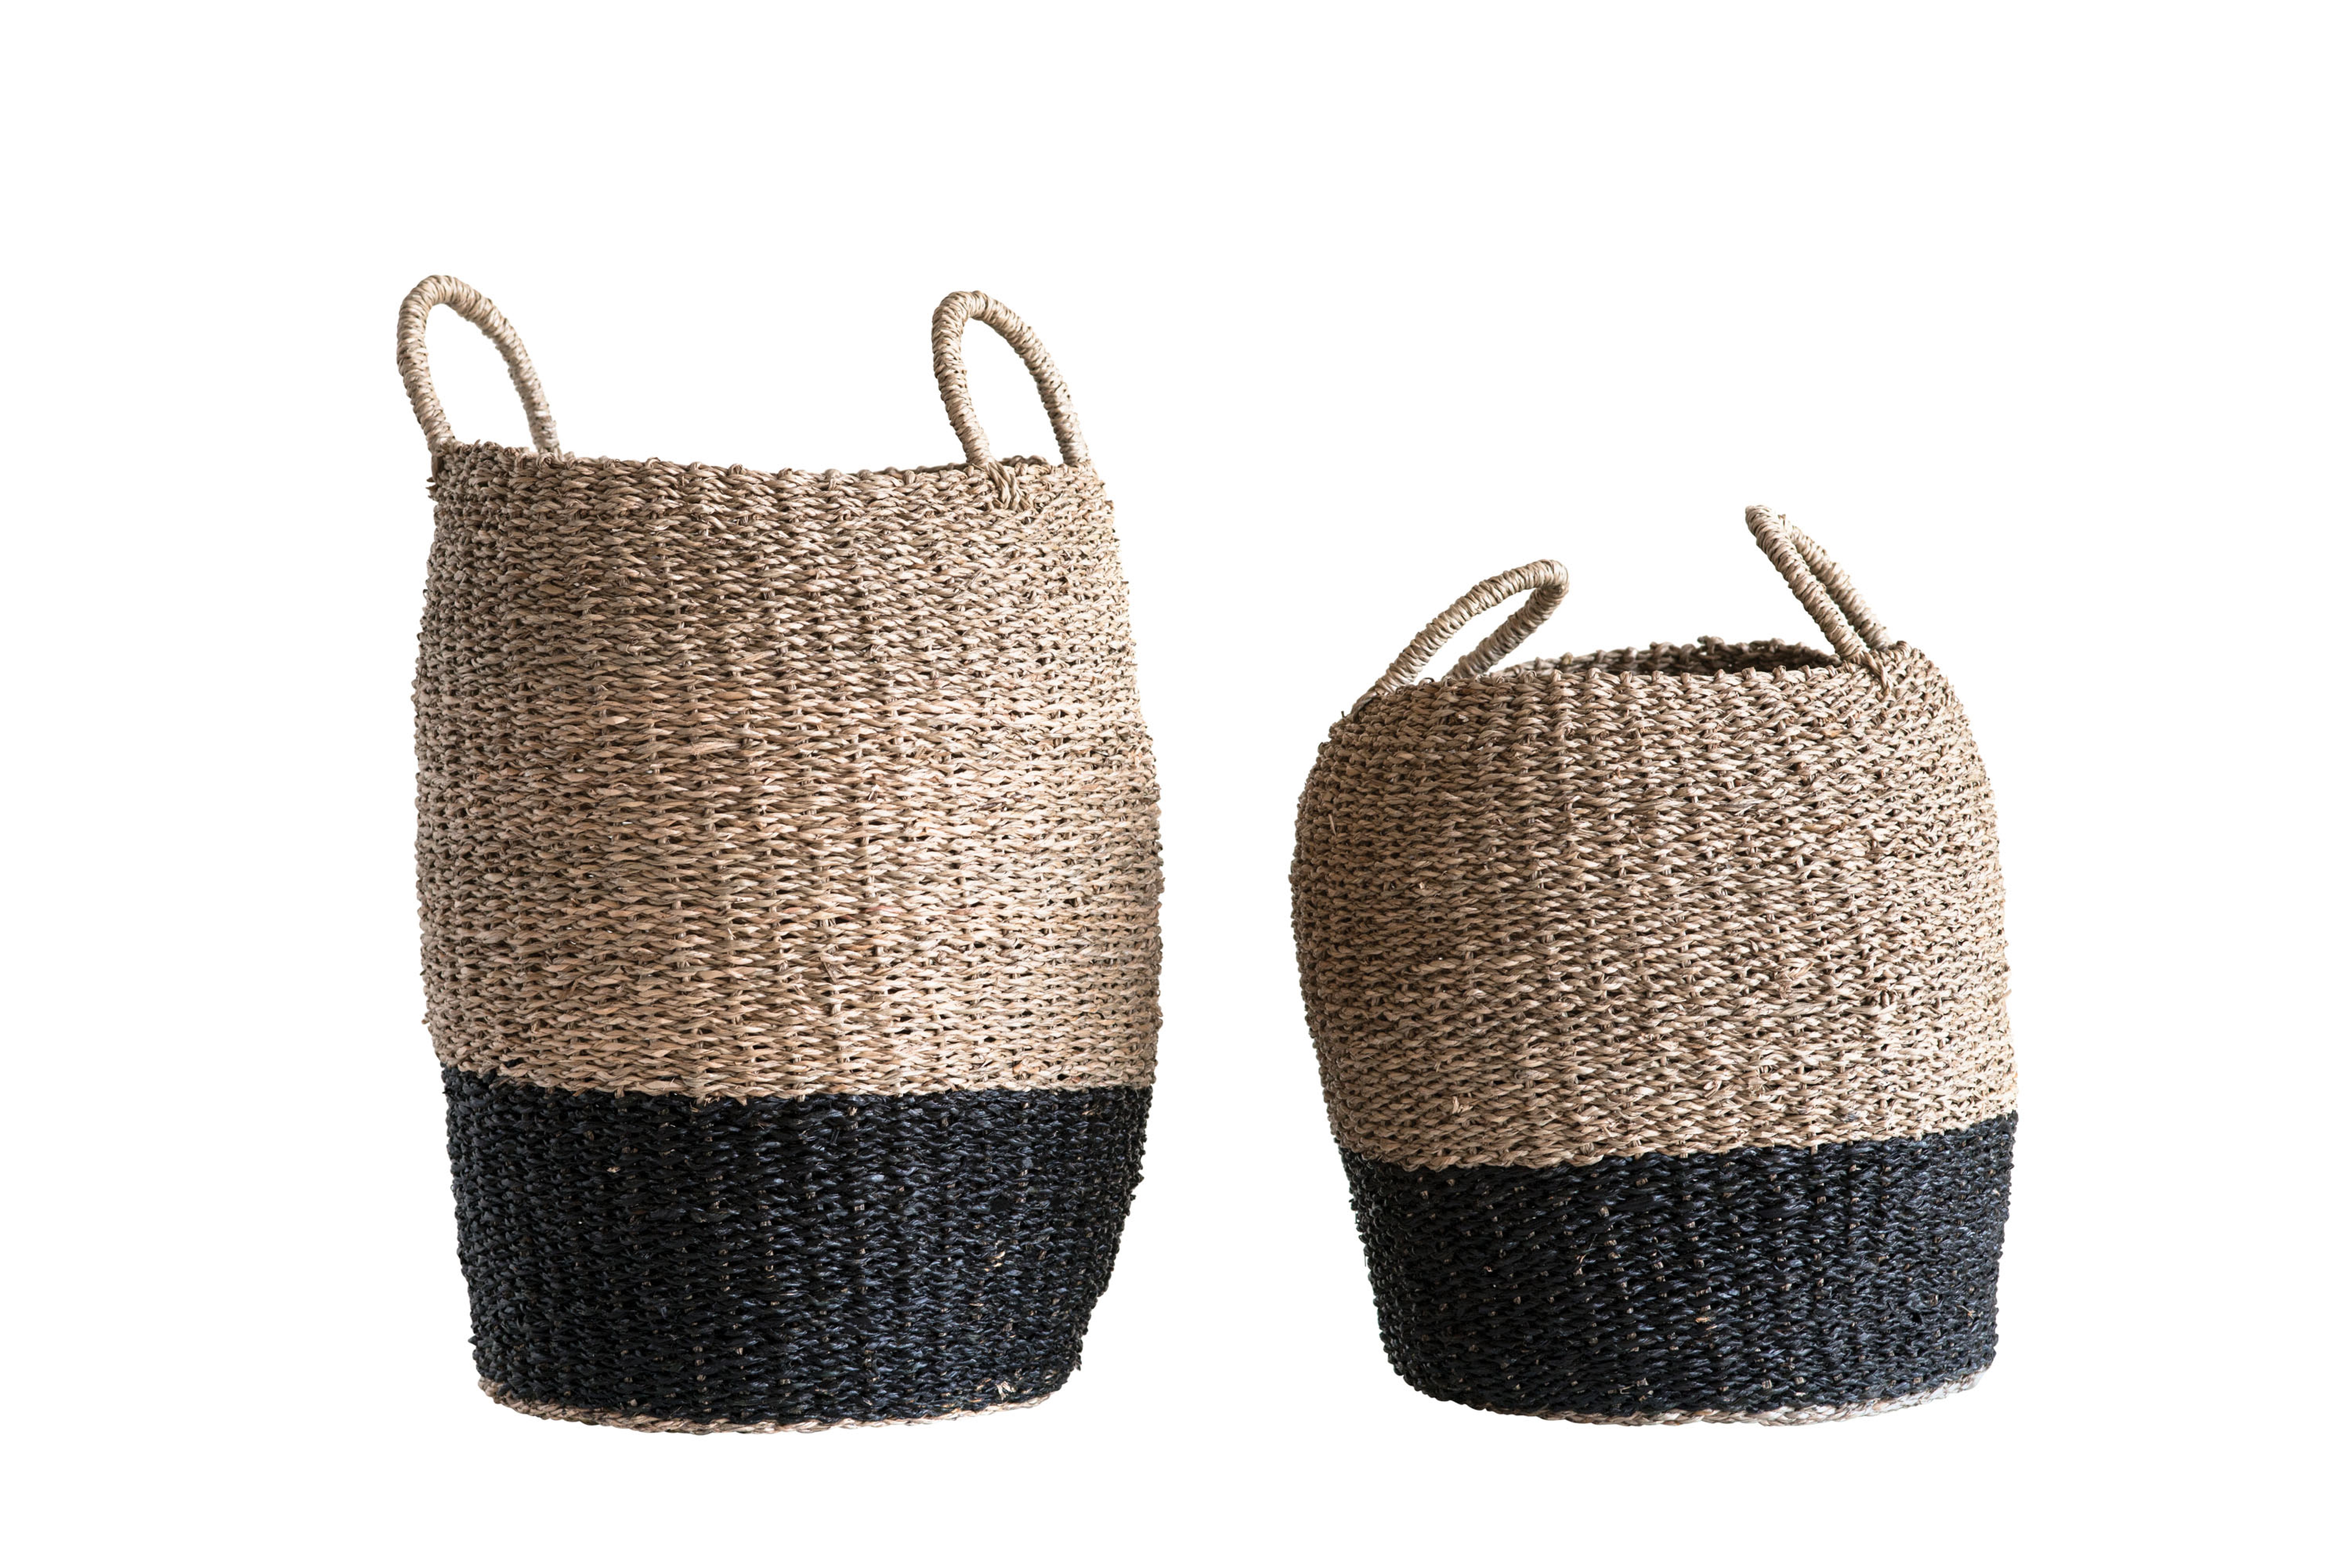 Brown & Black Woven Seagrass Baskets with Handles (Set of 2 Sizes) - Nomad Home